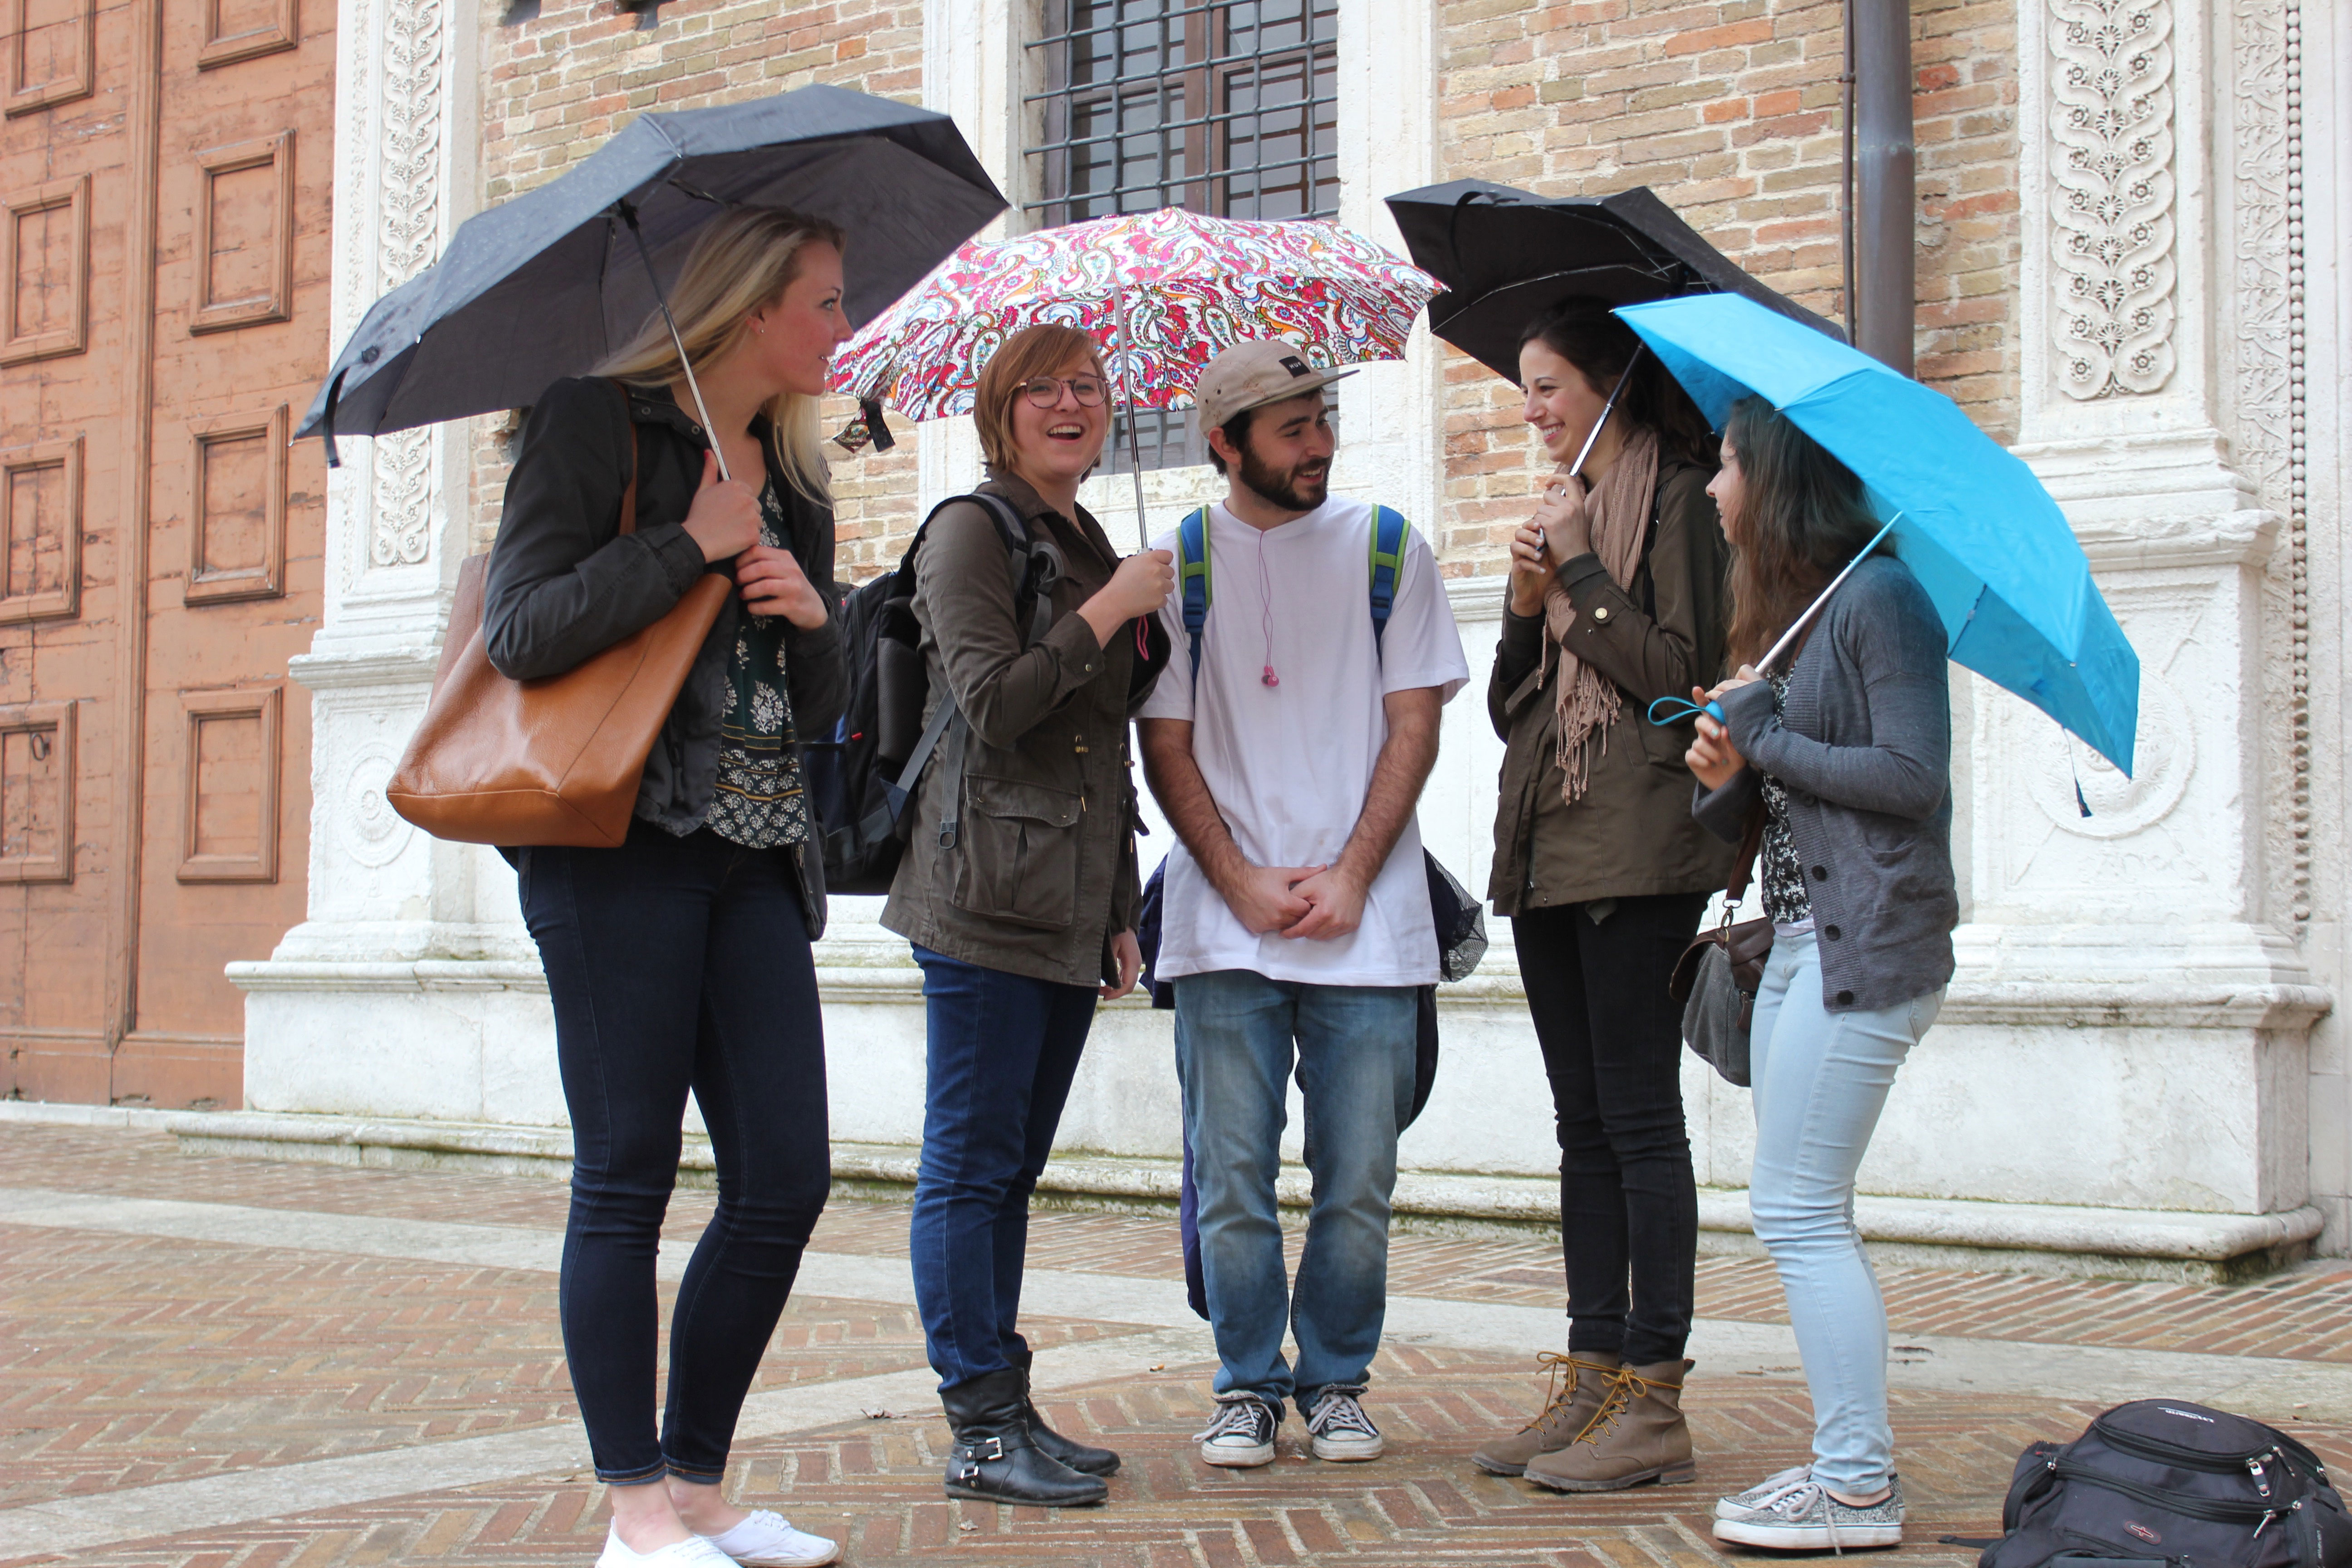 Students stand together under umbrellas outside a building.